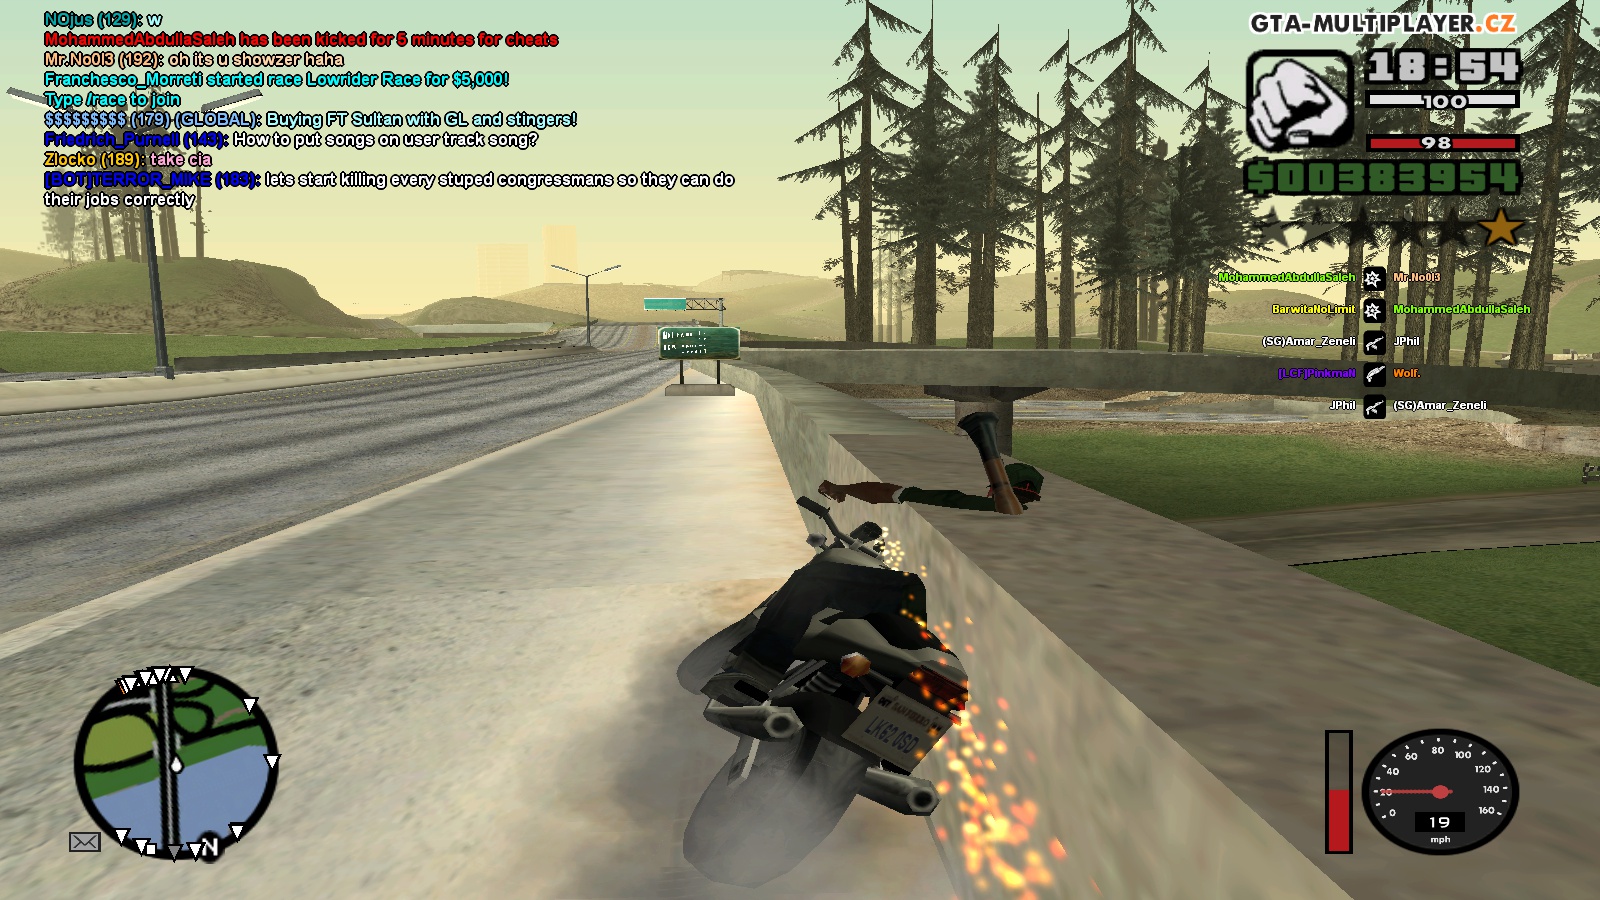 en i was going to ls and i bugged with bike